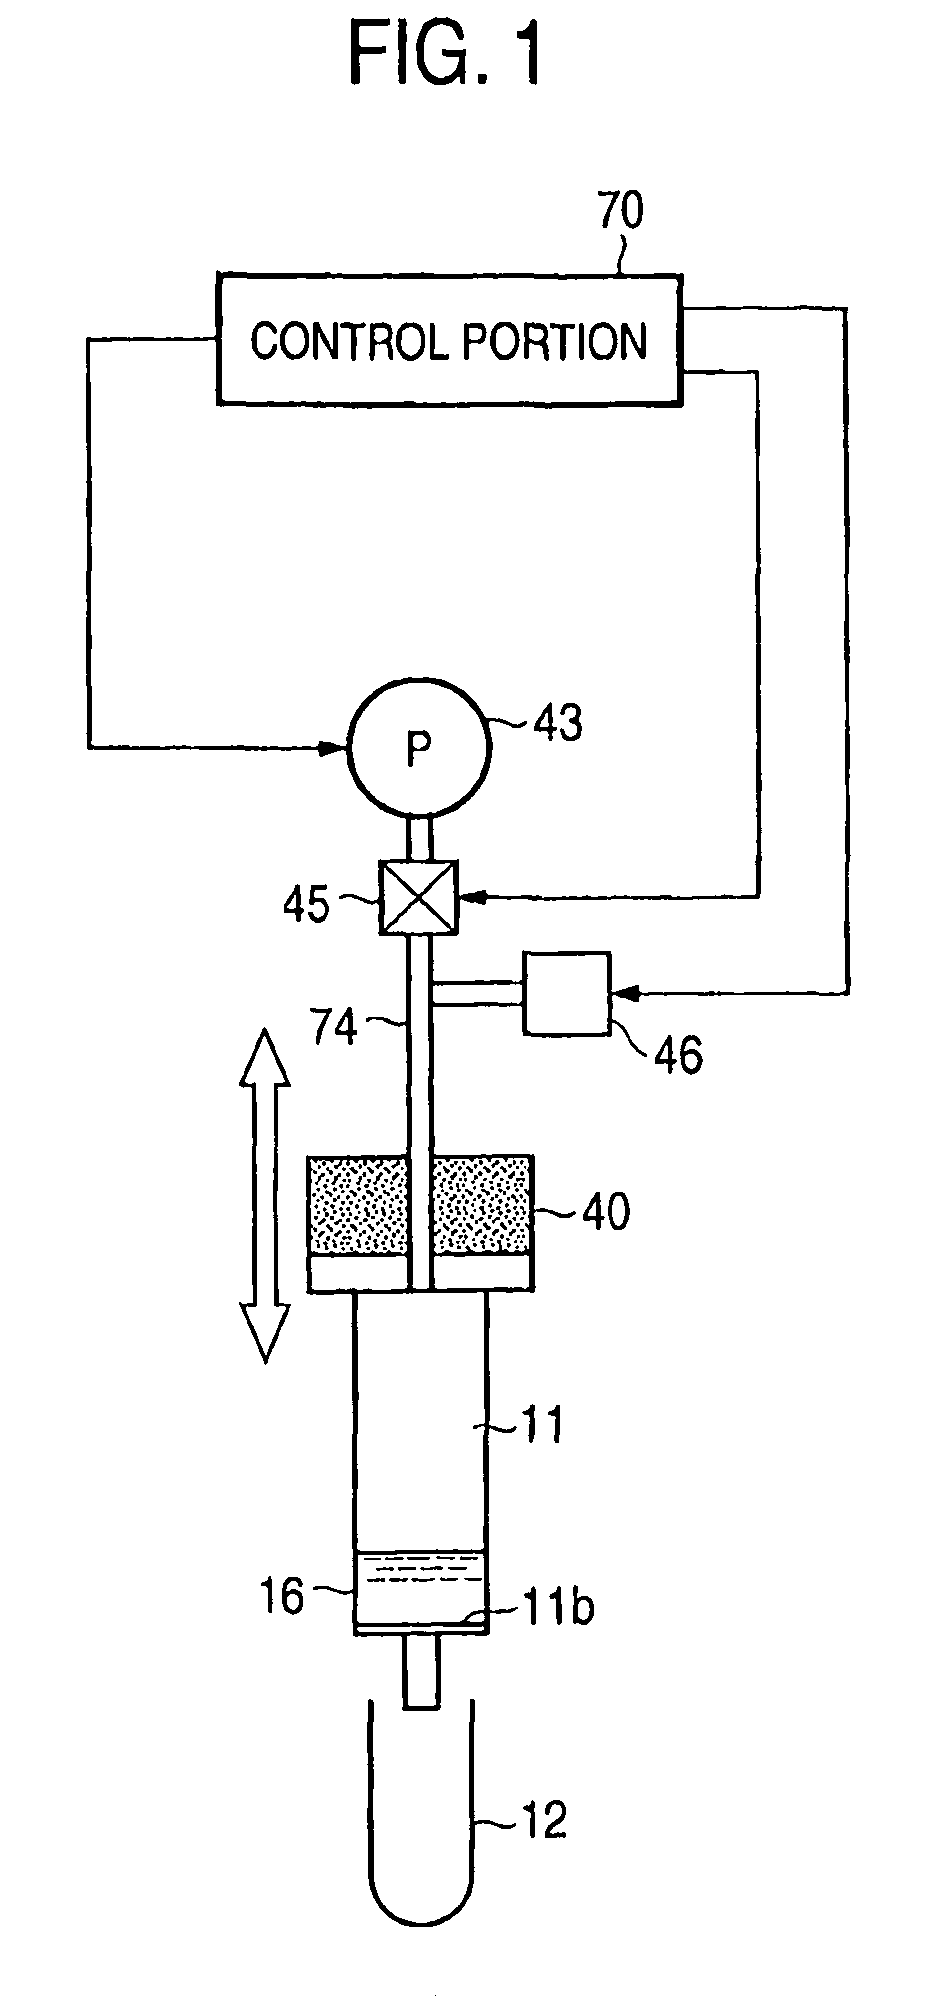 Method and apparatus of automatically isolating and purifying nucleic acid